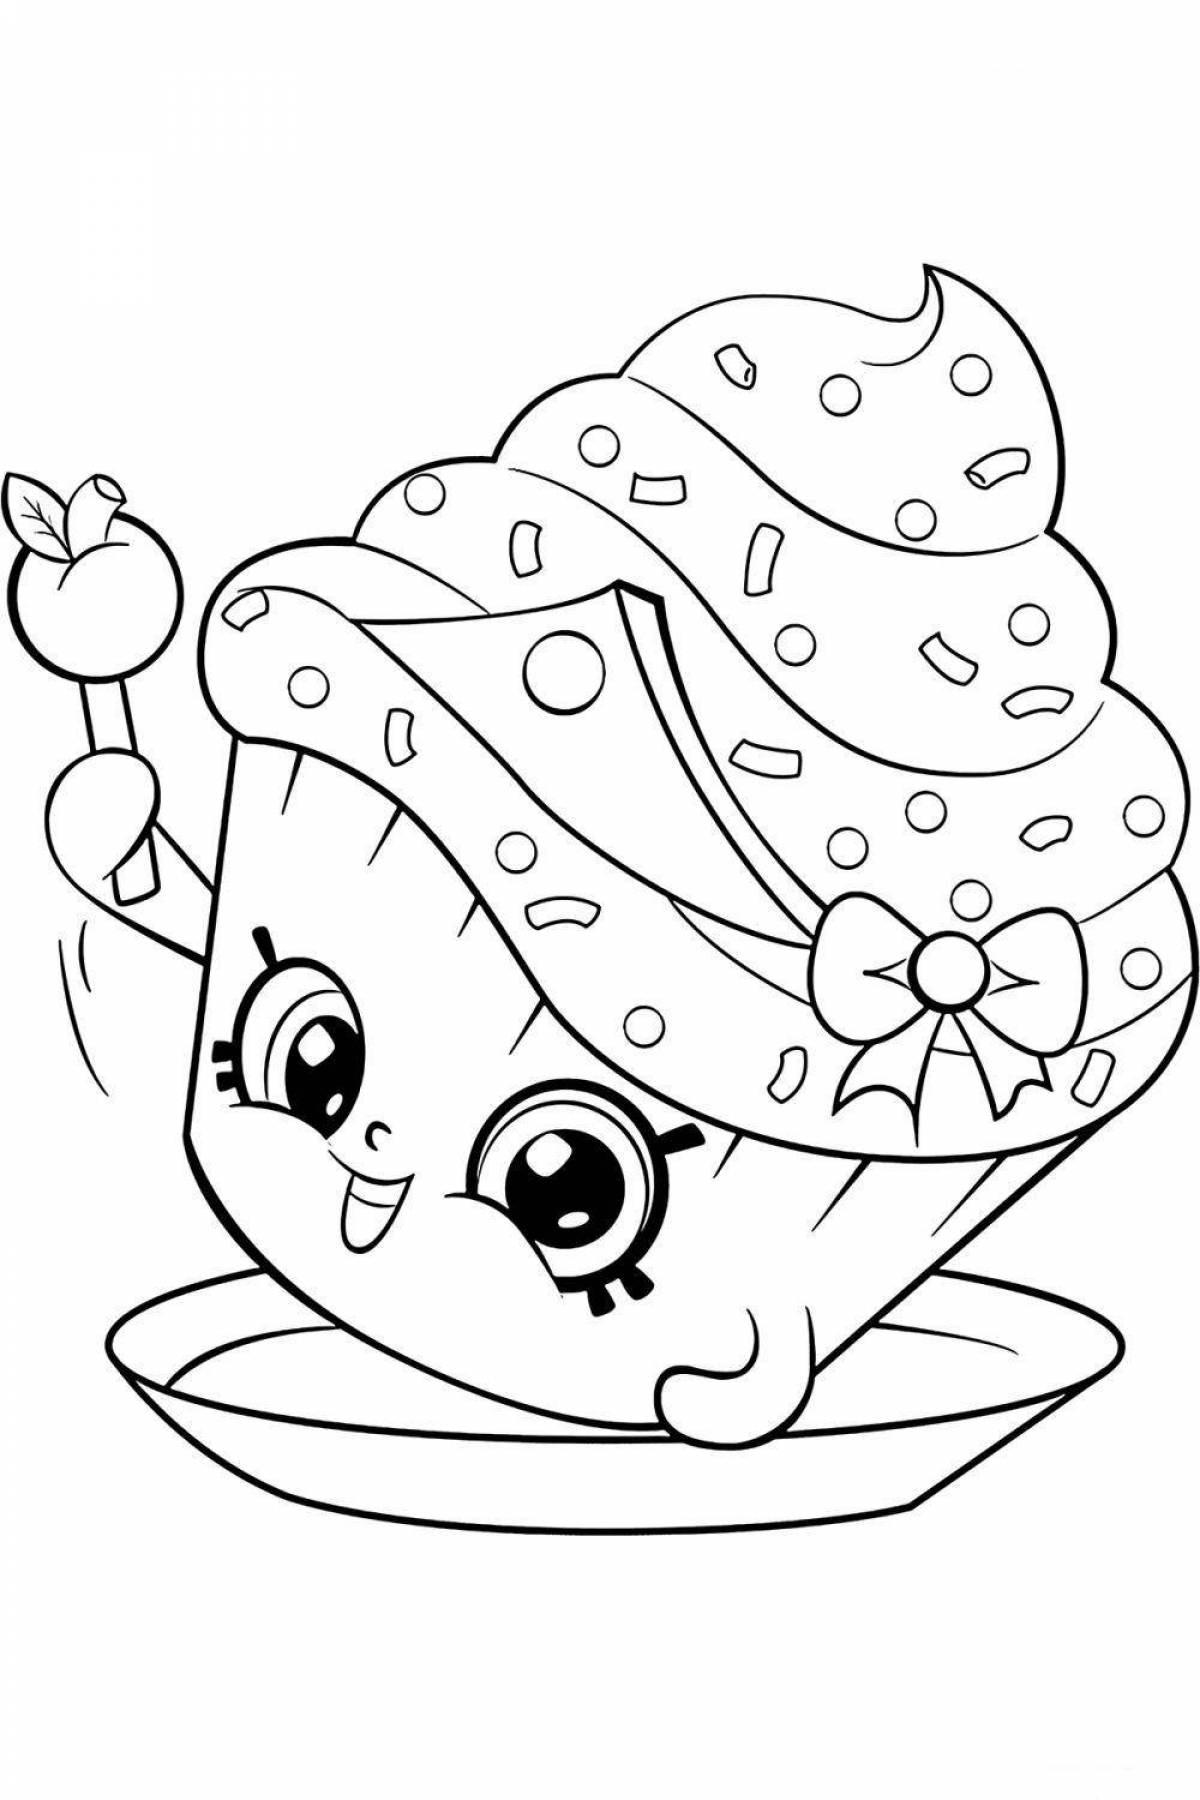 Cute shopkins coloring page